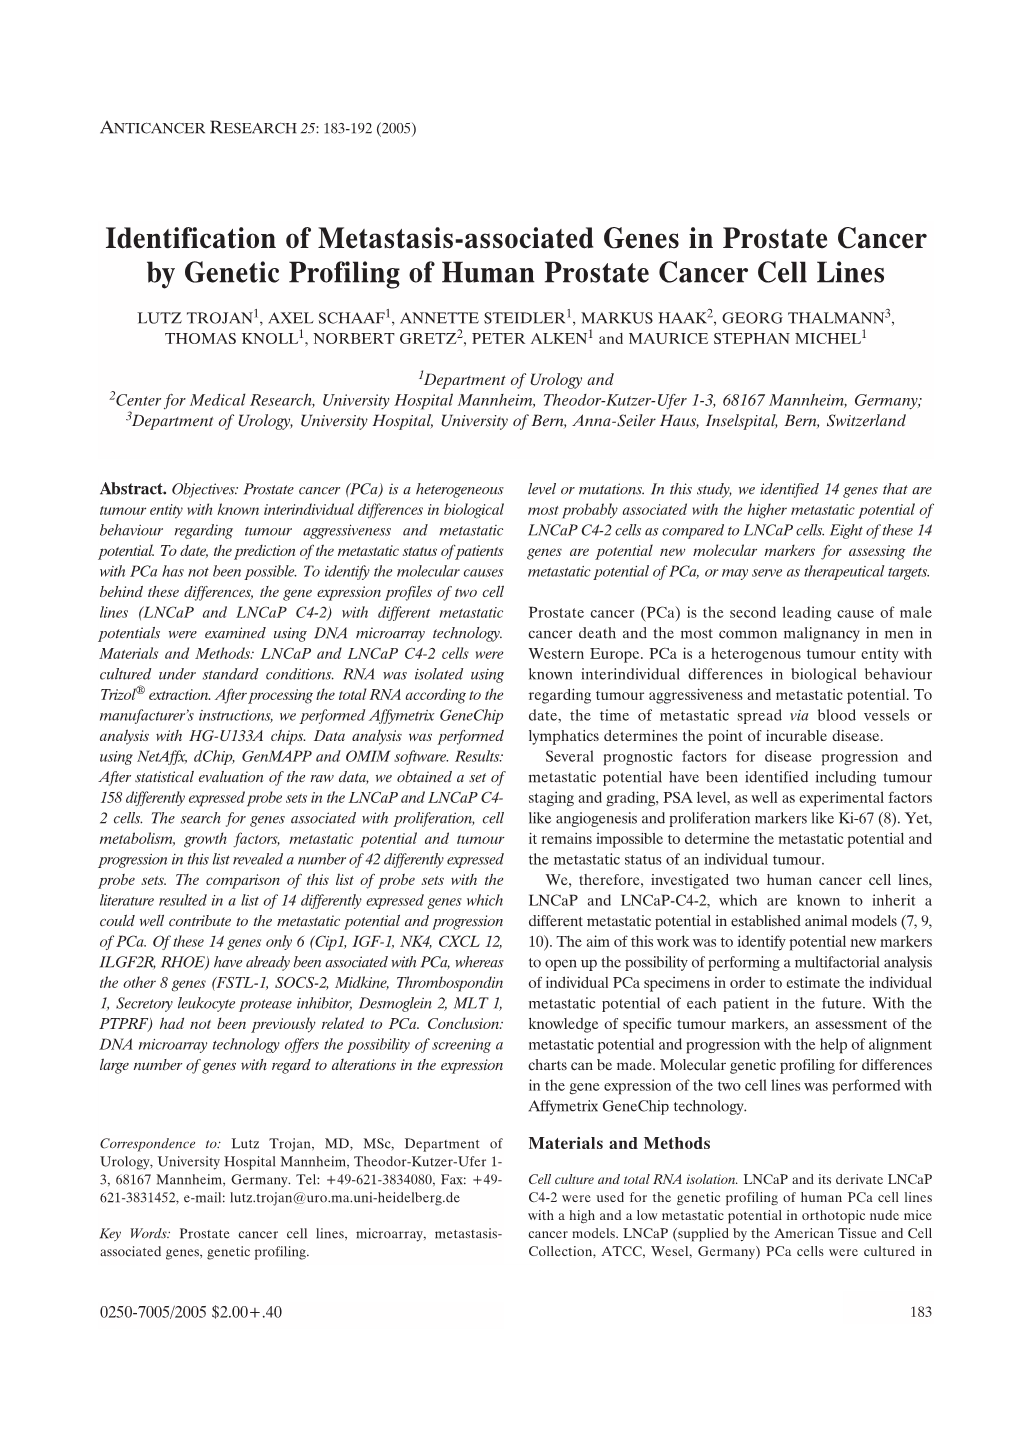 Identification of Metastasis-Associated Genes in Prostate Cancer by Genetic Profiling of Human Prostate Cancer Cell Lines